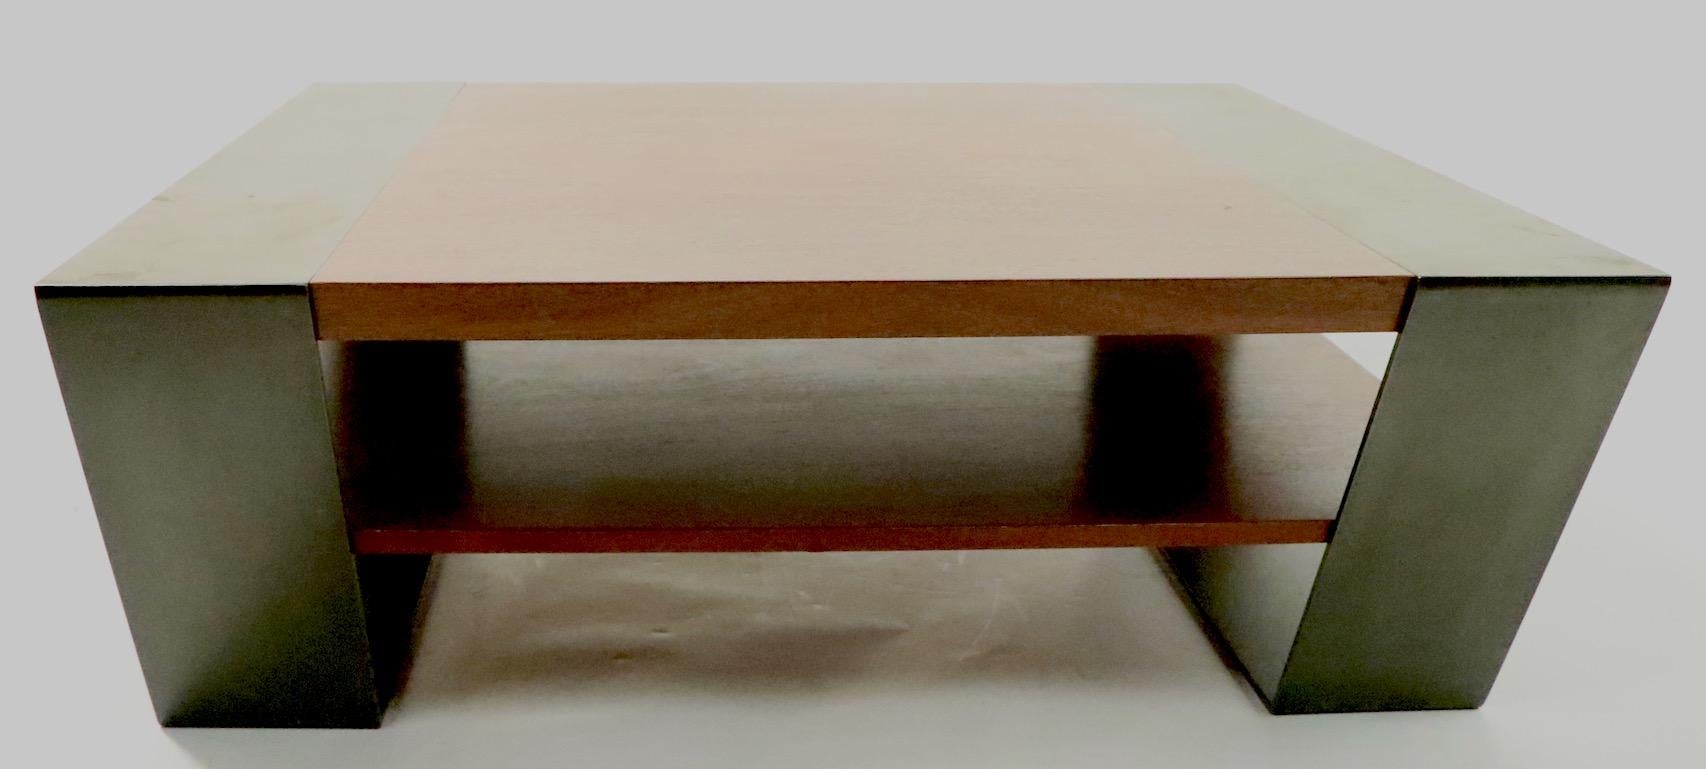 Chic architectural Postmodern contemporary coffee table of solid wood and steel construction. Very substantial, well designed and constructed, fully and correctly marked, as shown.
Original, clean condition, shows only light cosmetic wear, normal